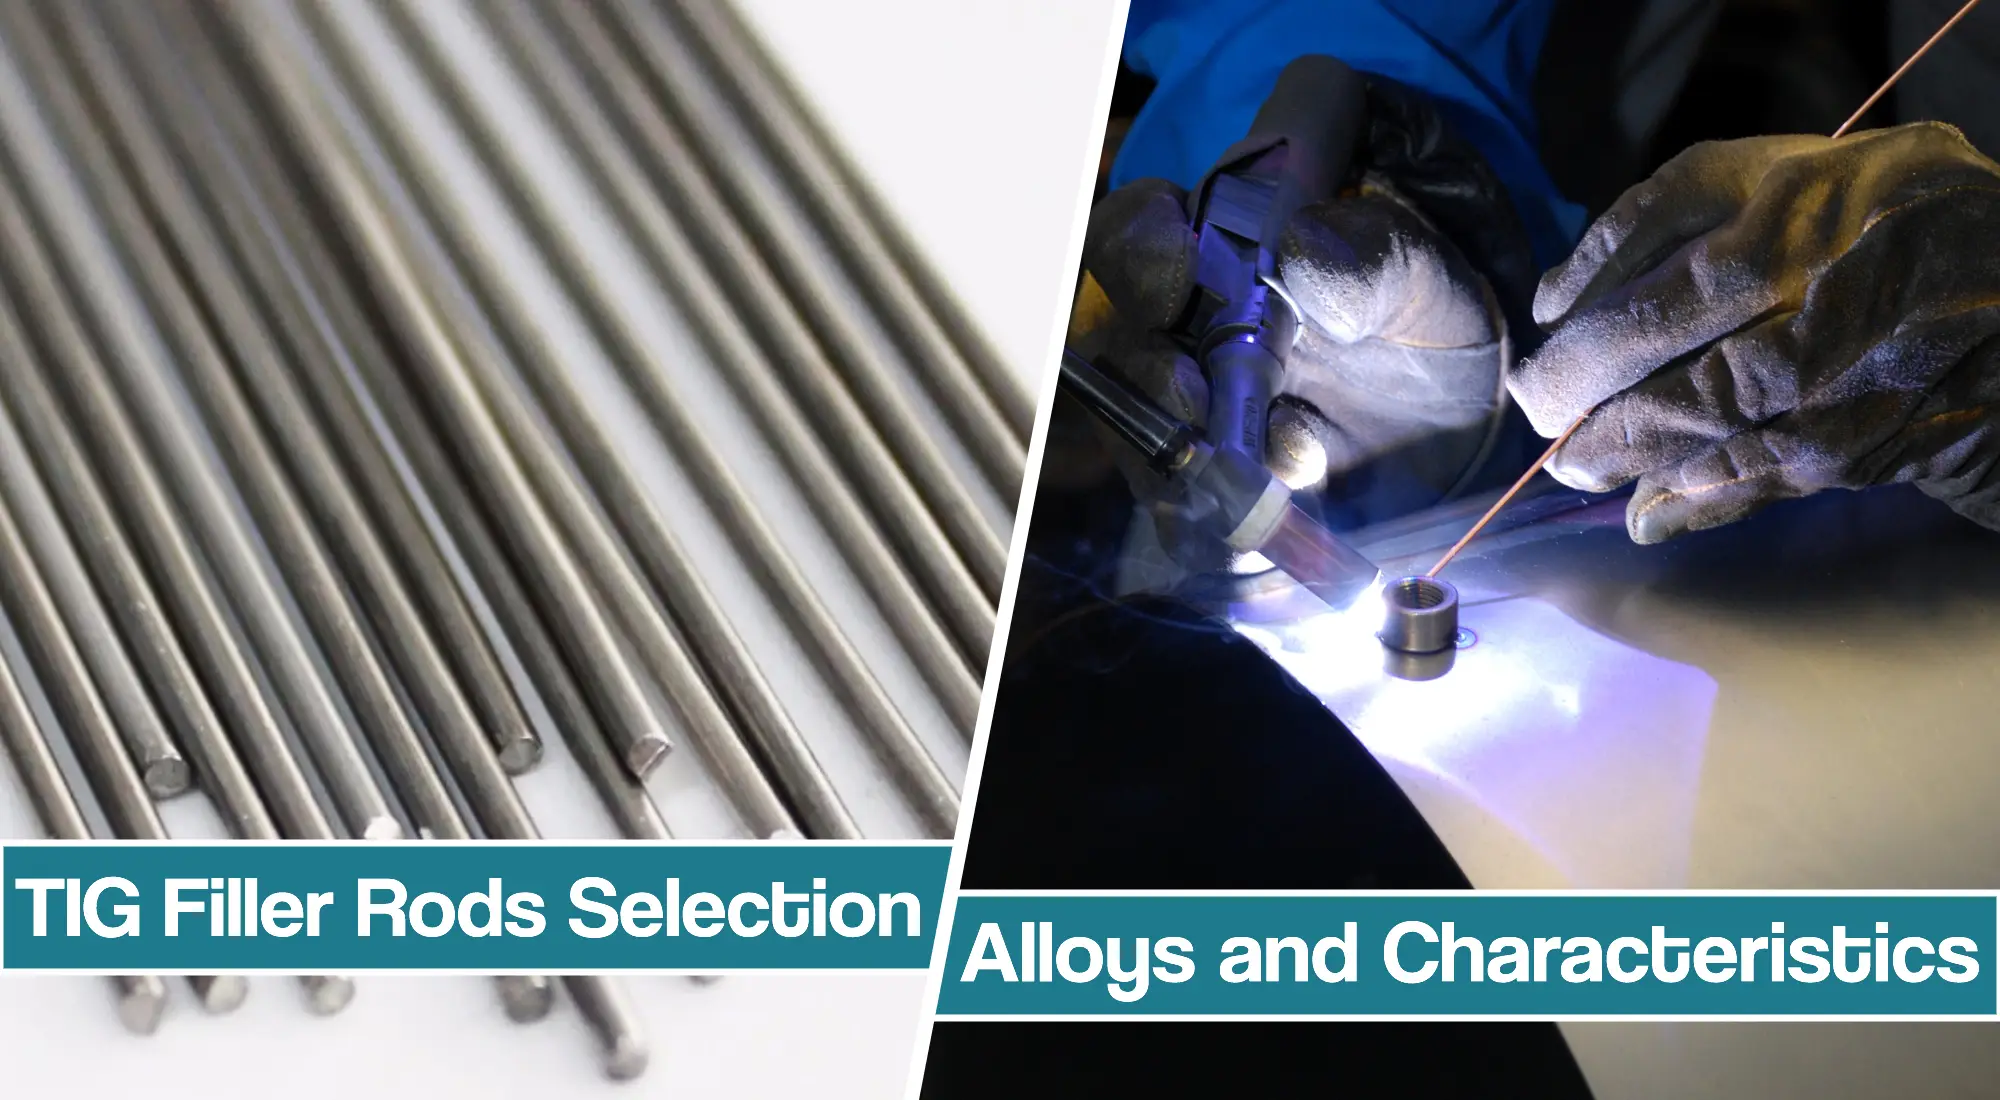 TIG Filler Rods Charts And Classification For Aluminum, Stainless and Mild Steel